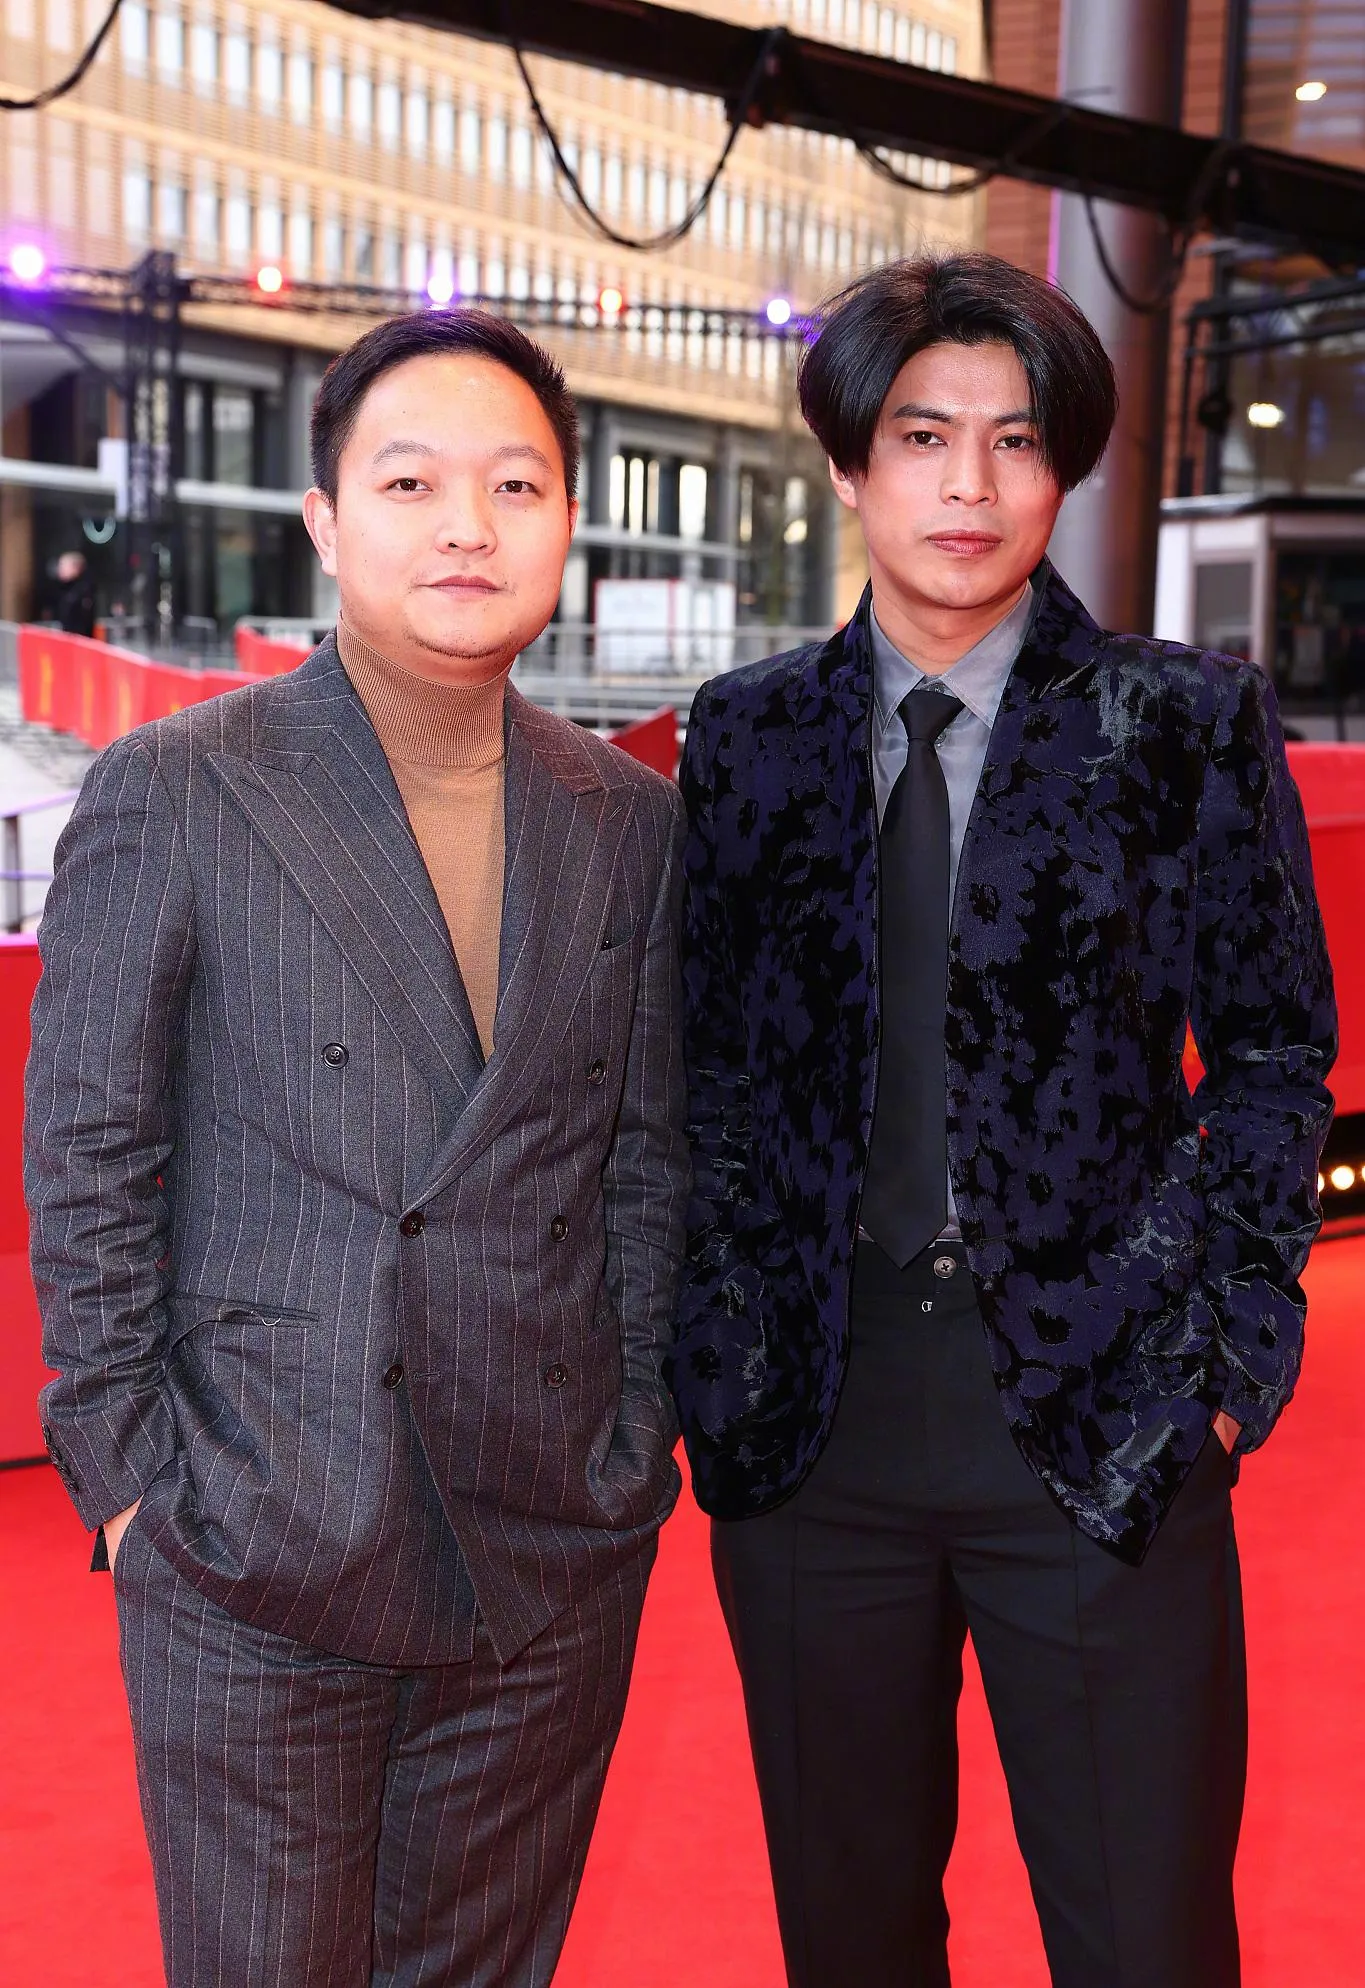 'Xue yun' crew attended the red carpet premiere of the film at the Berlin International Film Festival | FMV6